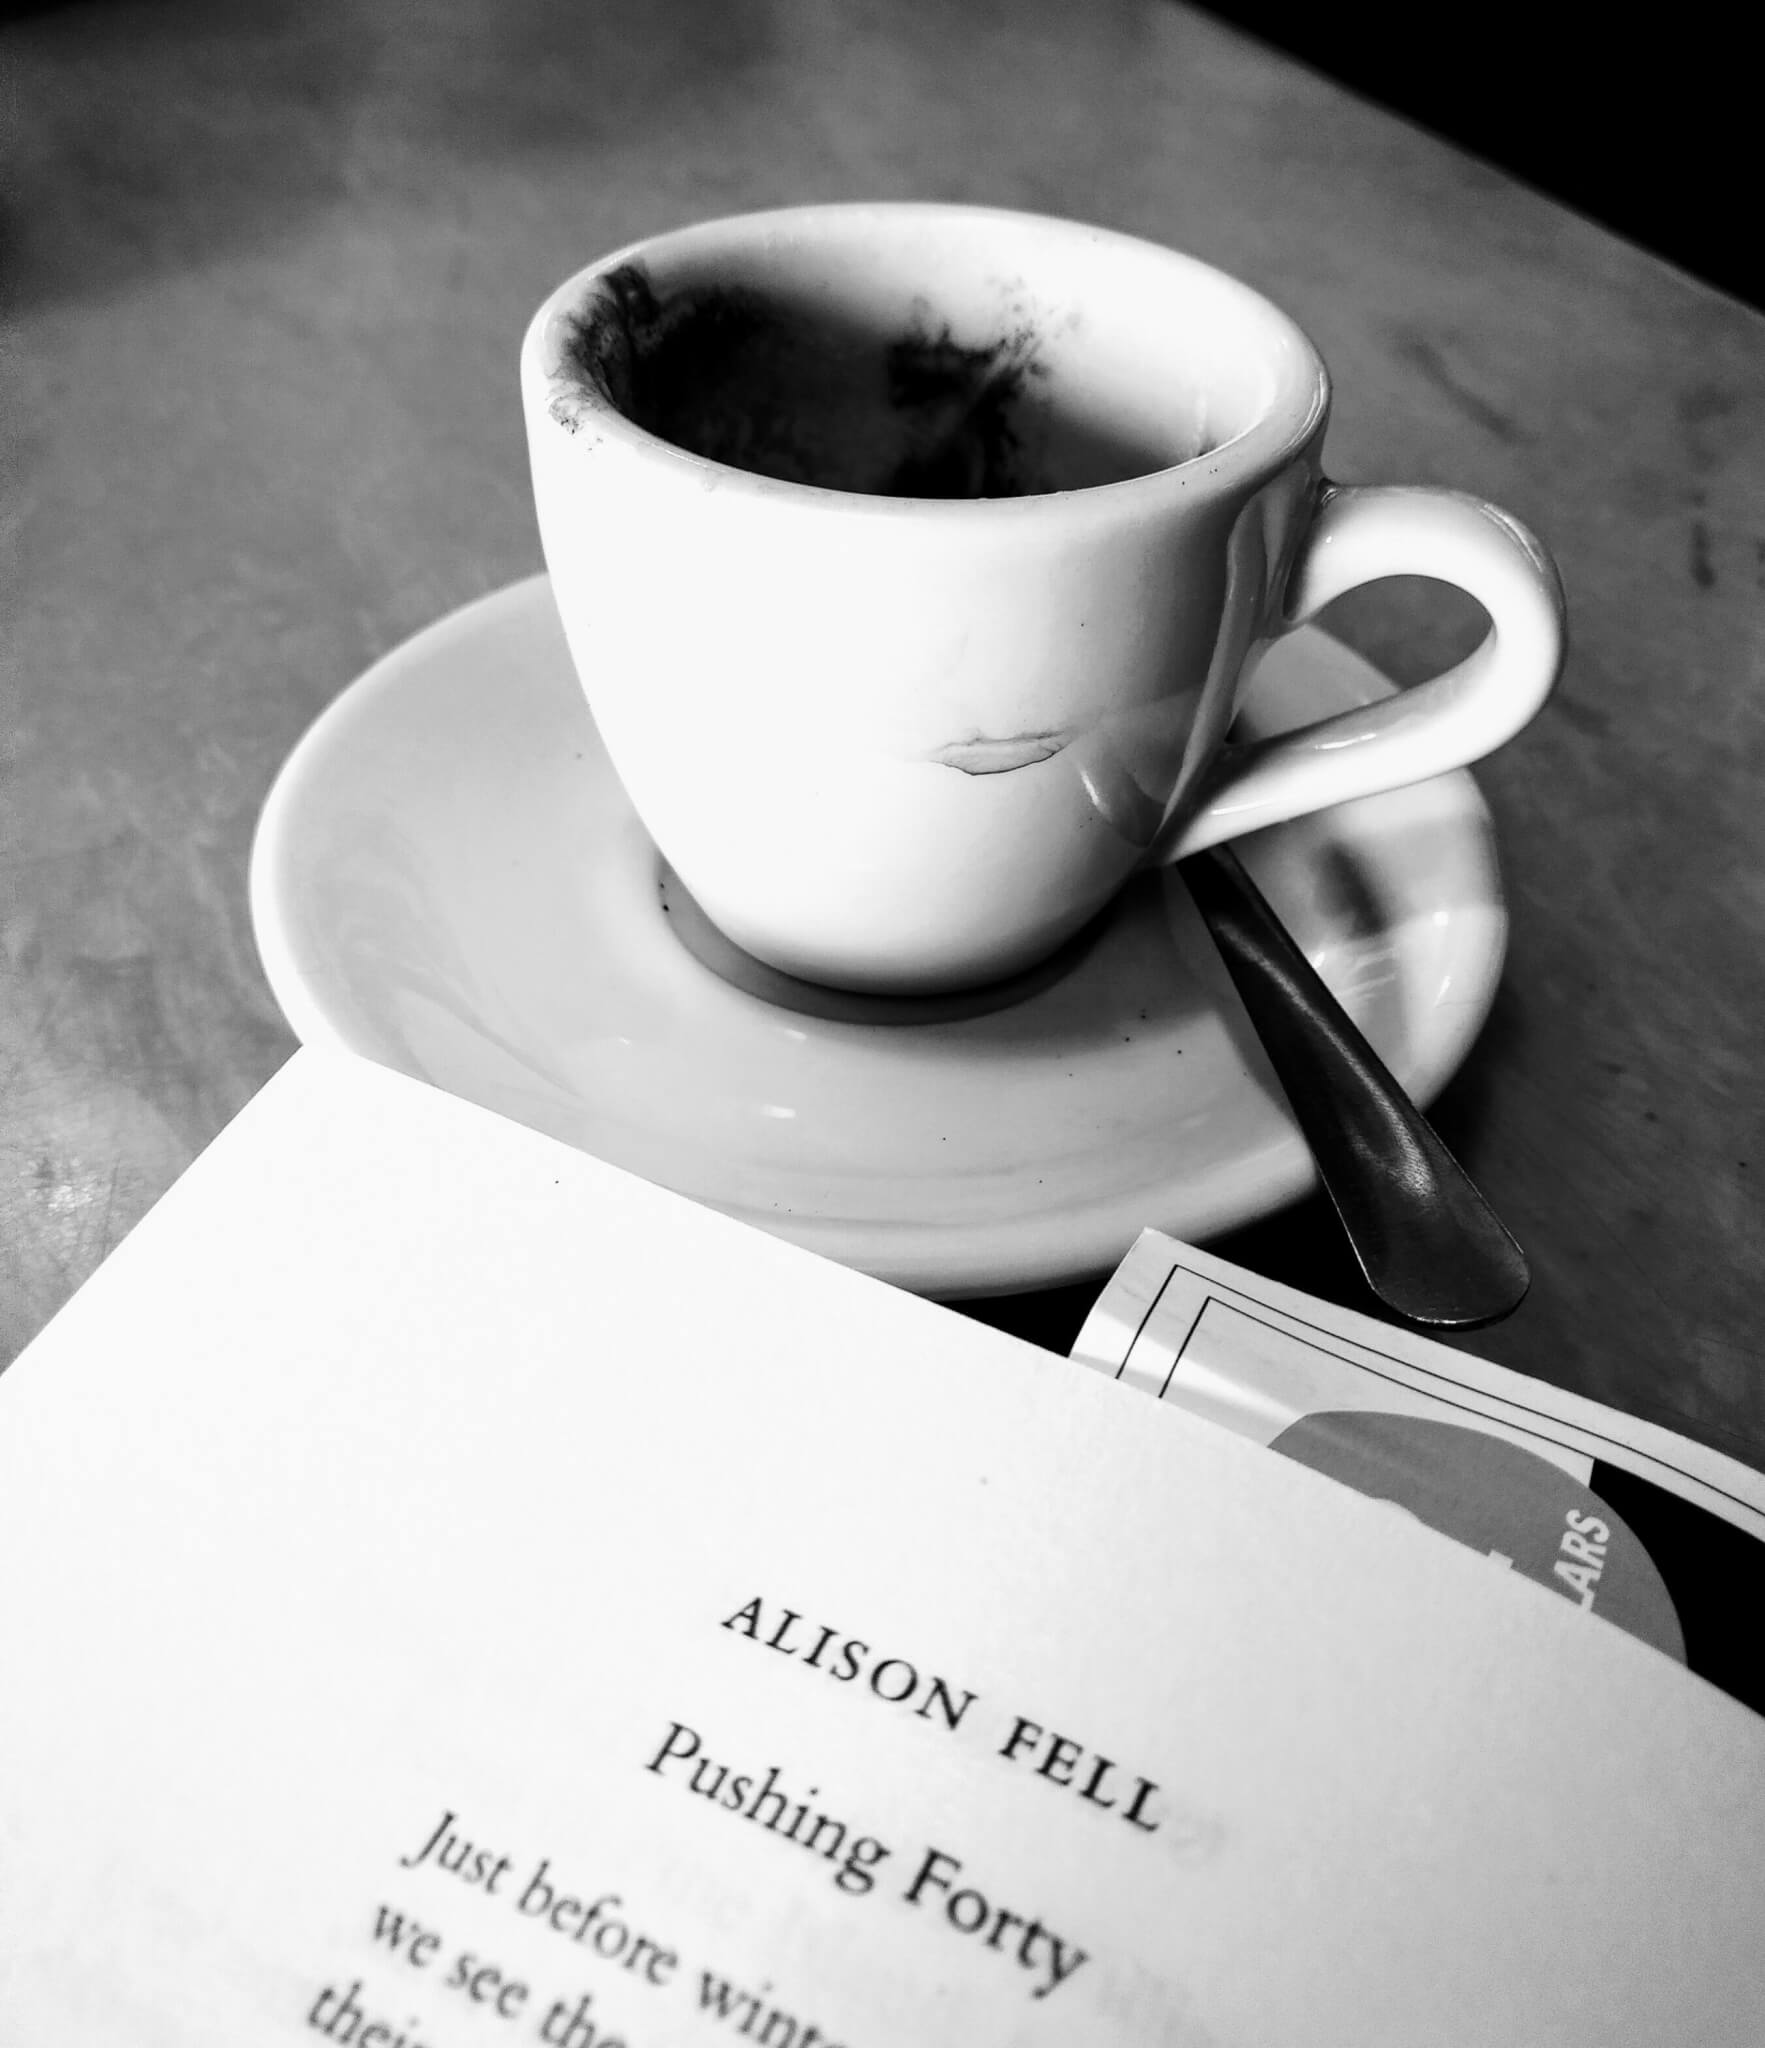 black and white image of an empty espresso cup with a poetry book open to a page titled "Pushing Forty"